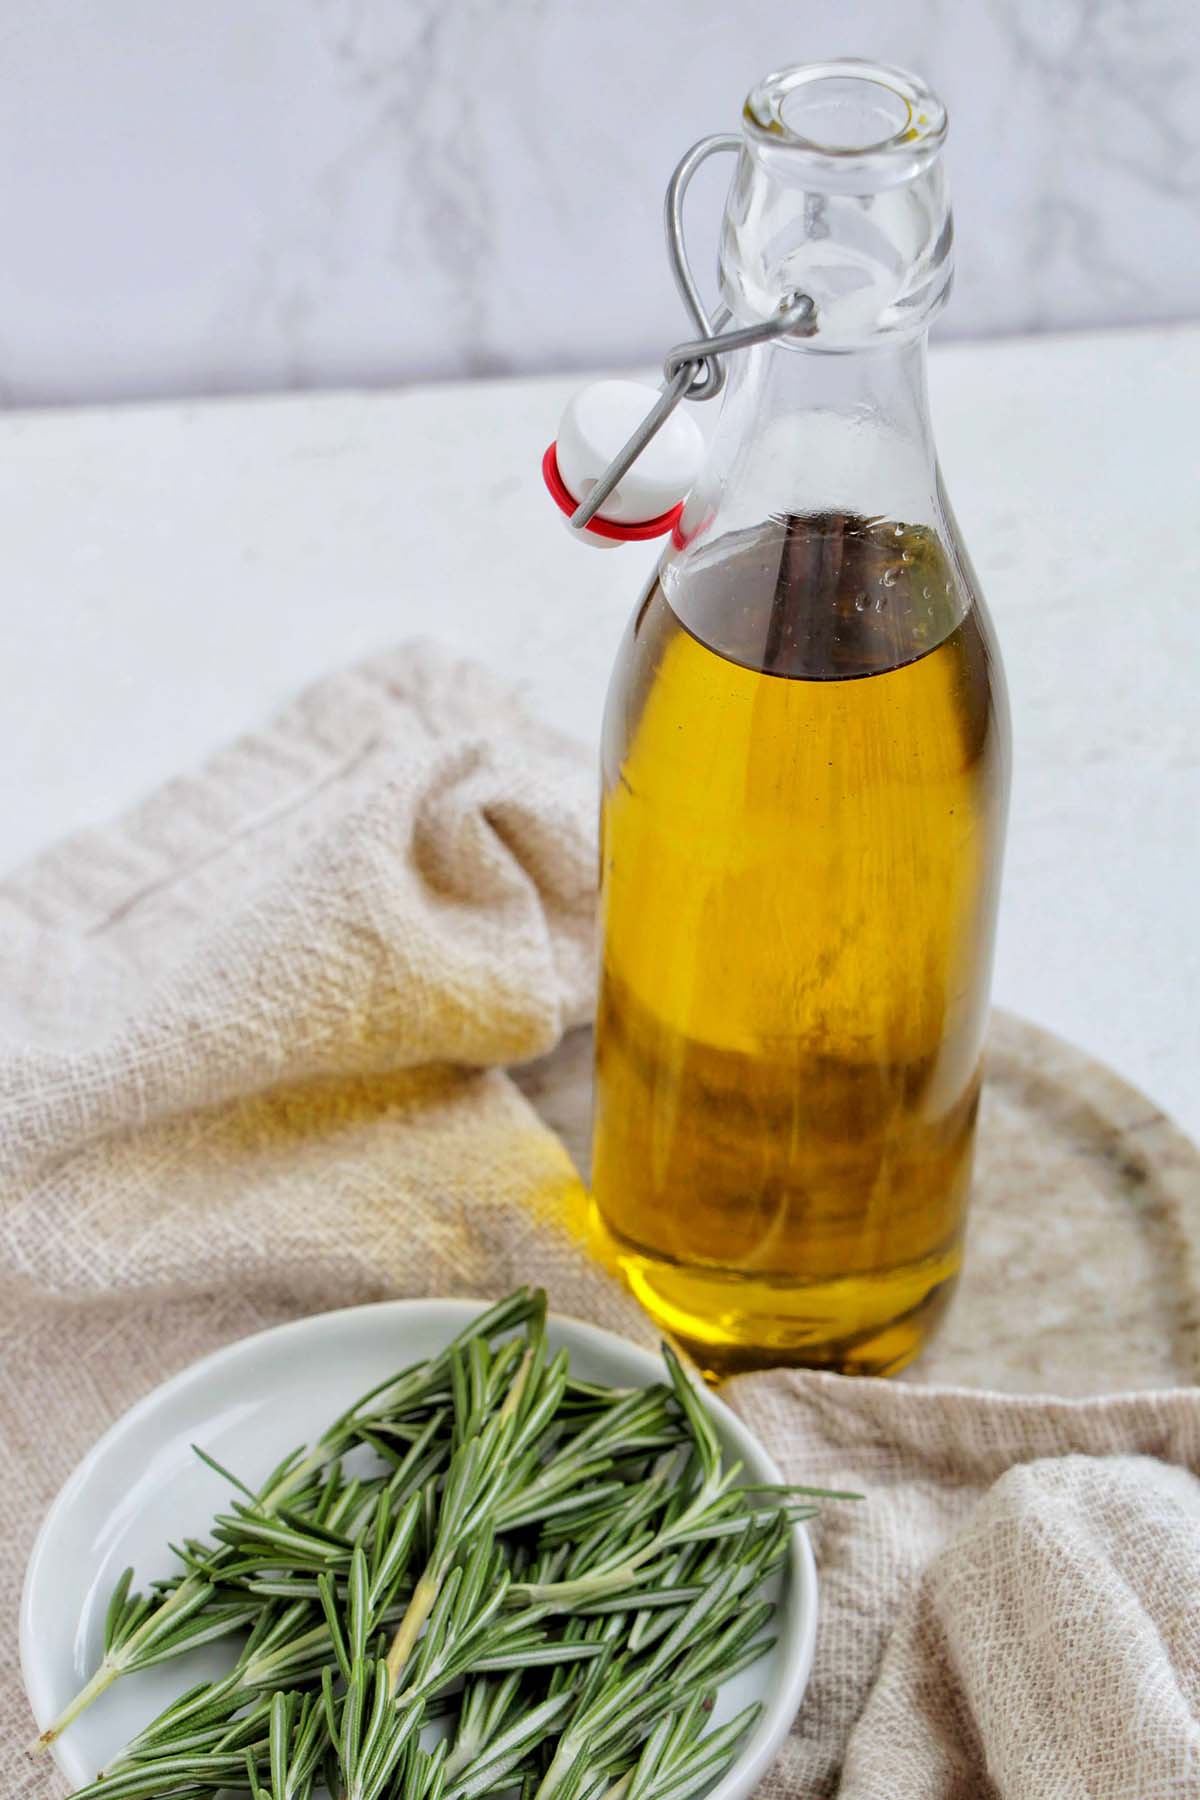 rosemary infused olive oil in a glass jar next to a plate of rosemary.